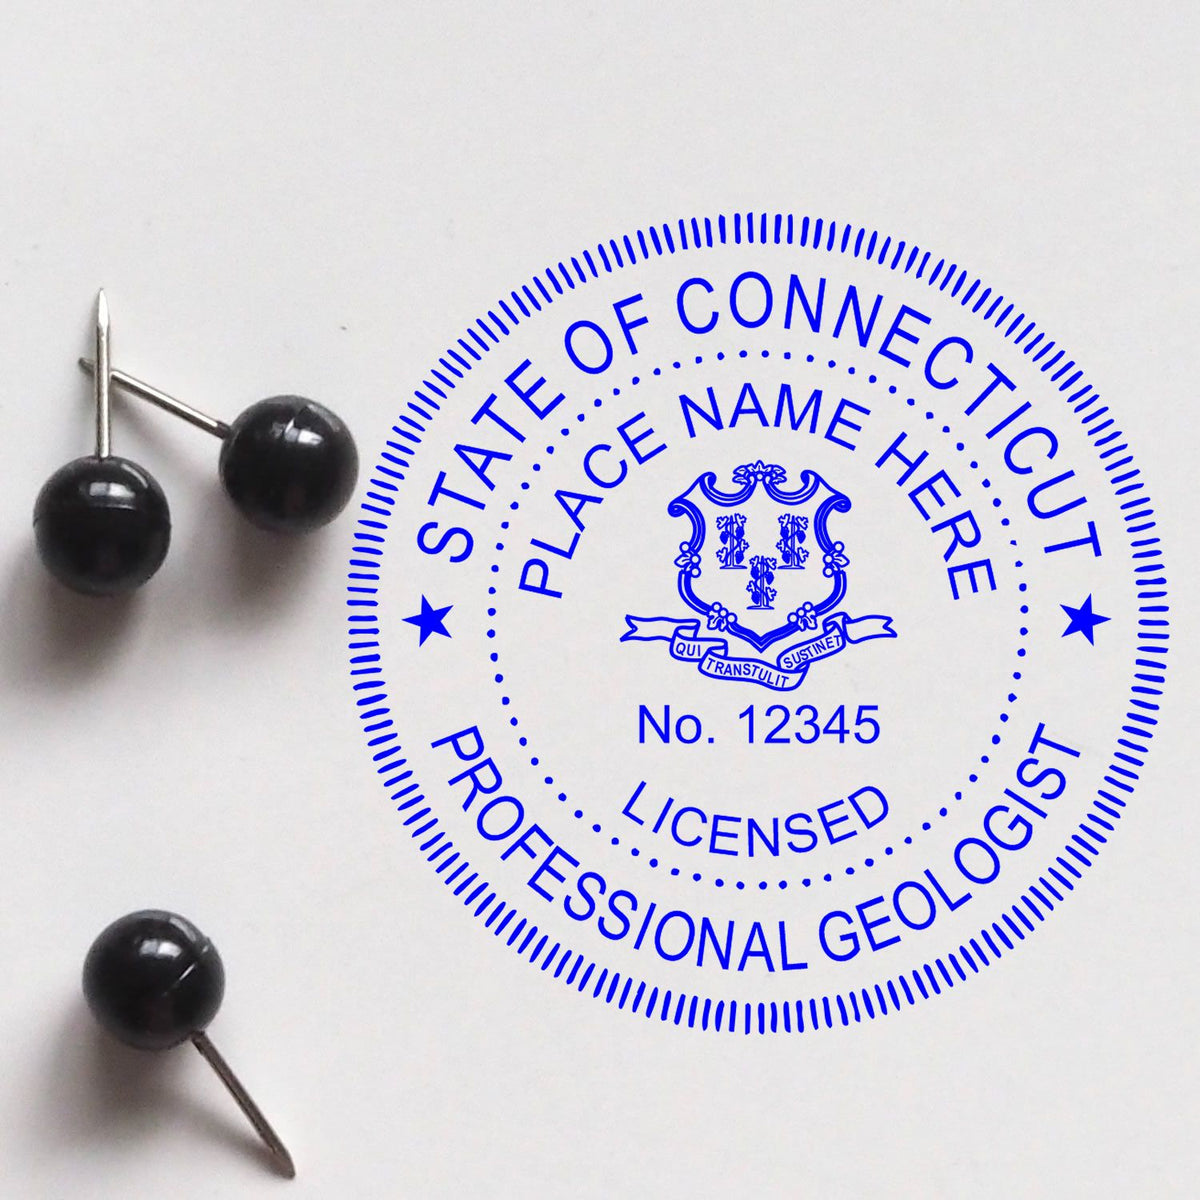 This paper is stamped with a sample imprint of the Self-Inking Connecticut Geologist Stamp, signifying its quality and reliability.